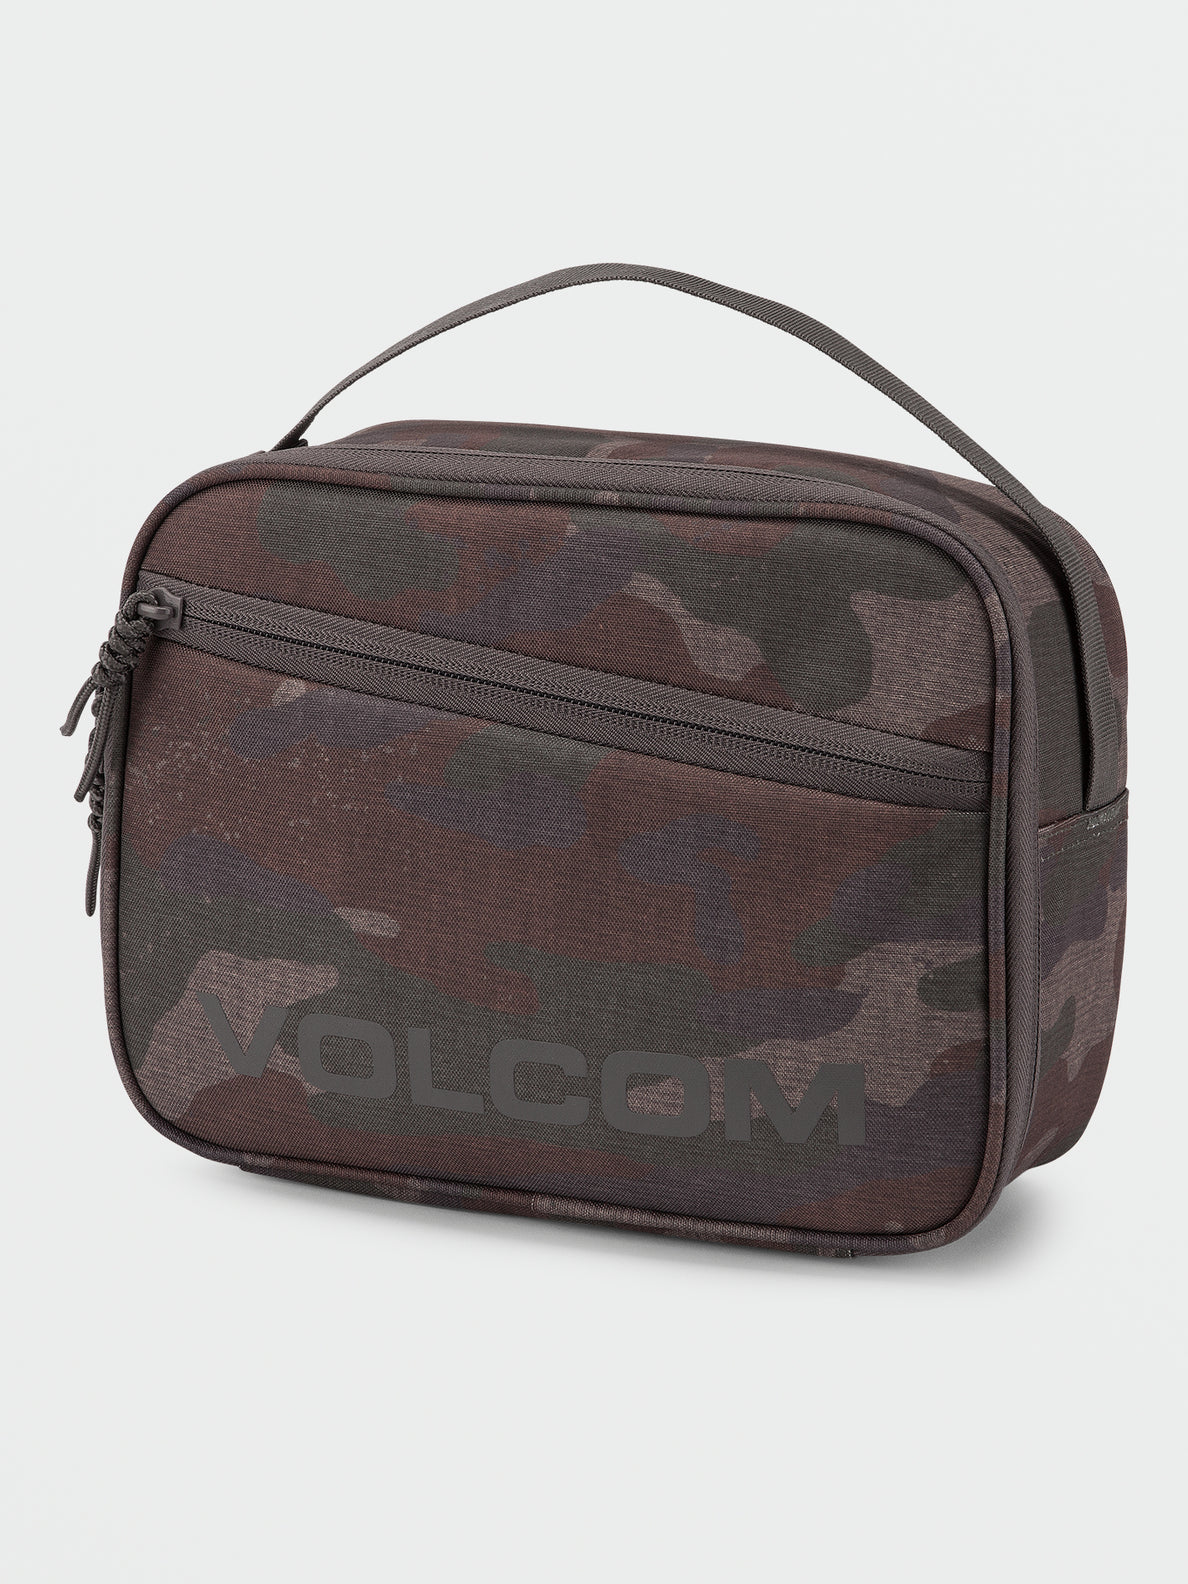 VOLCOM LUNCH BOX - ARMY GREEN COMBO (D6522203_ARC) [F]